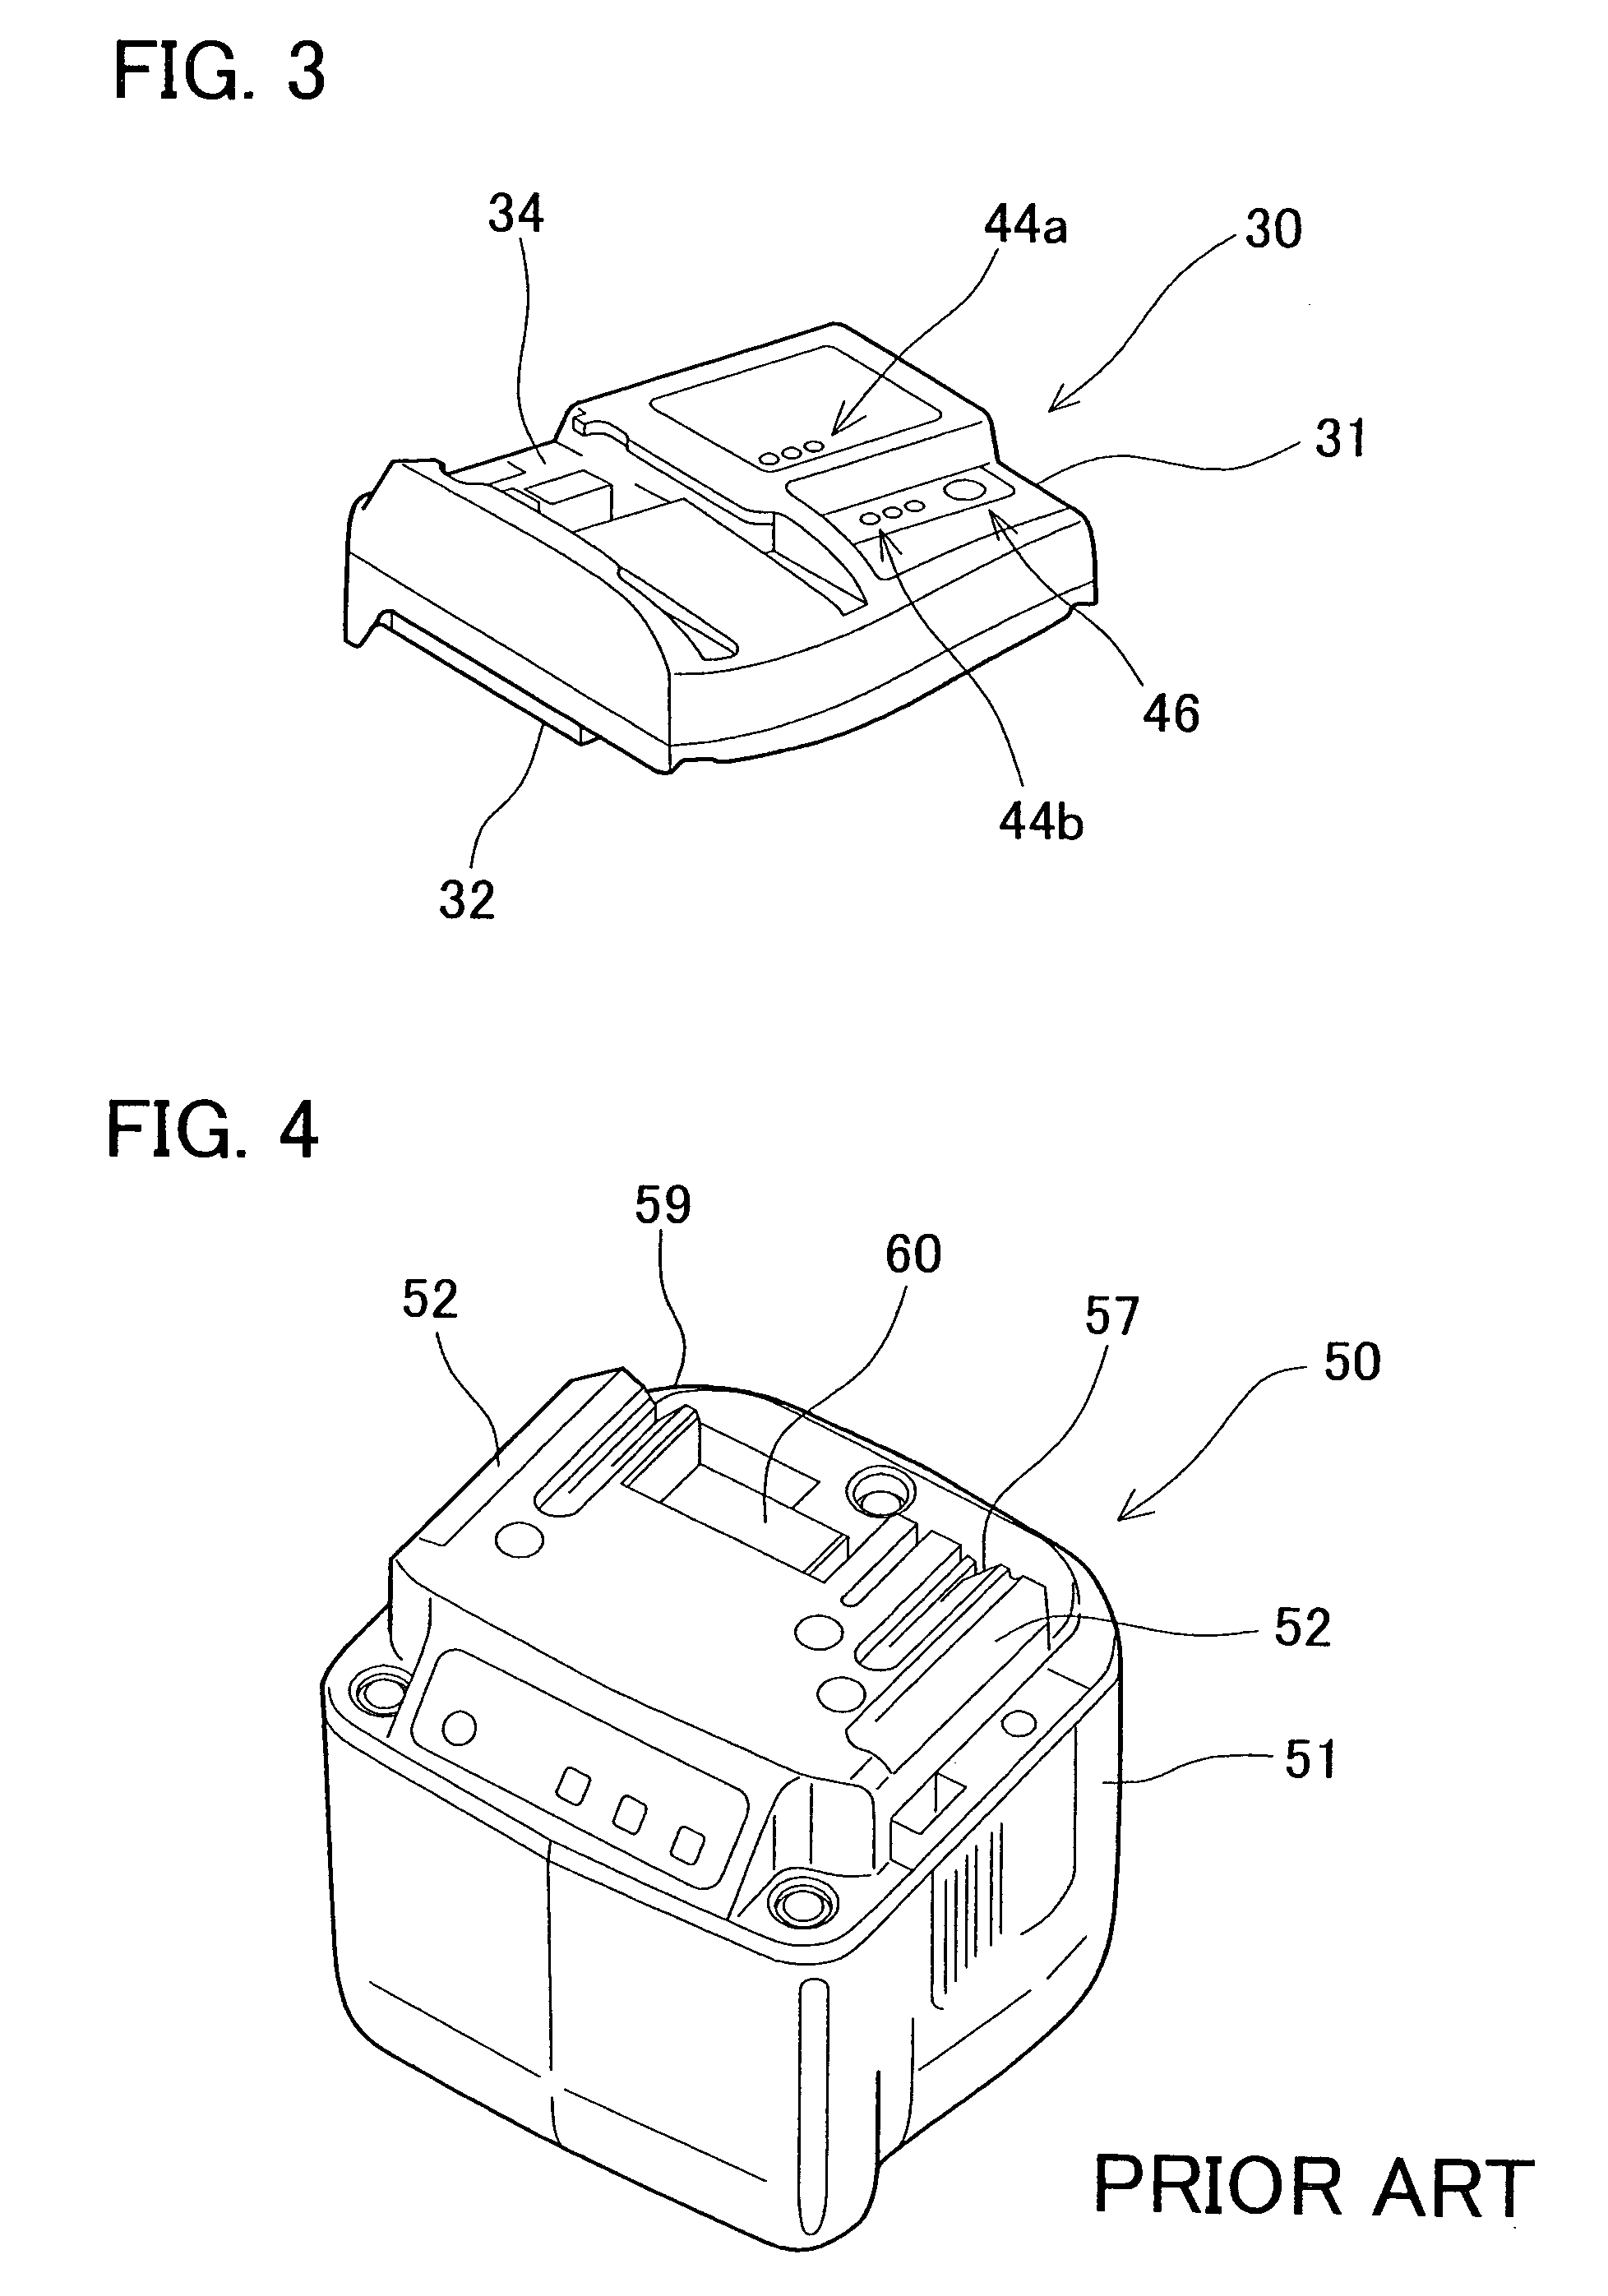 Apparatus for refreshing batteries